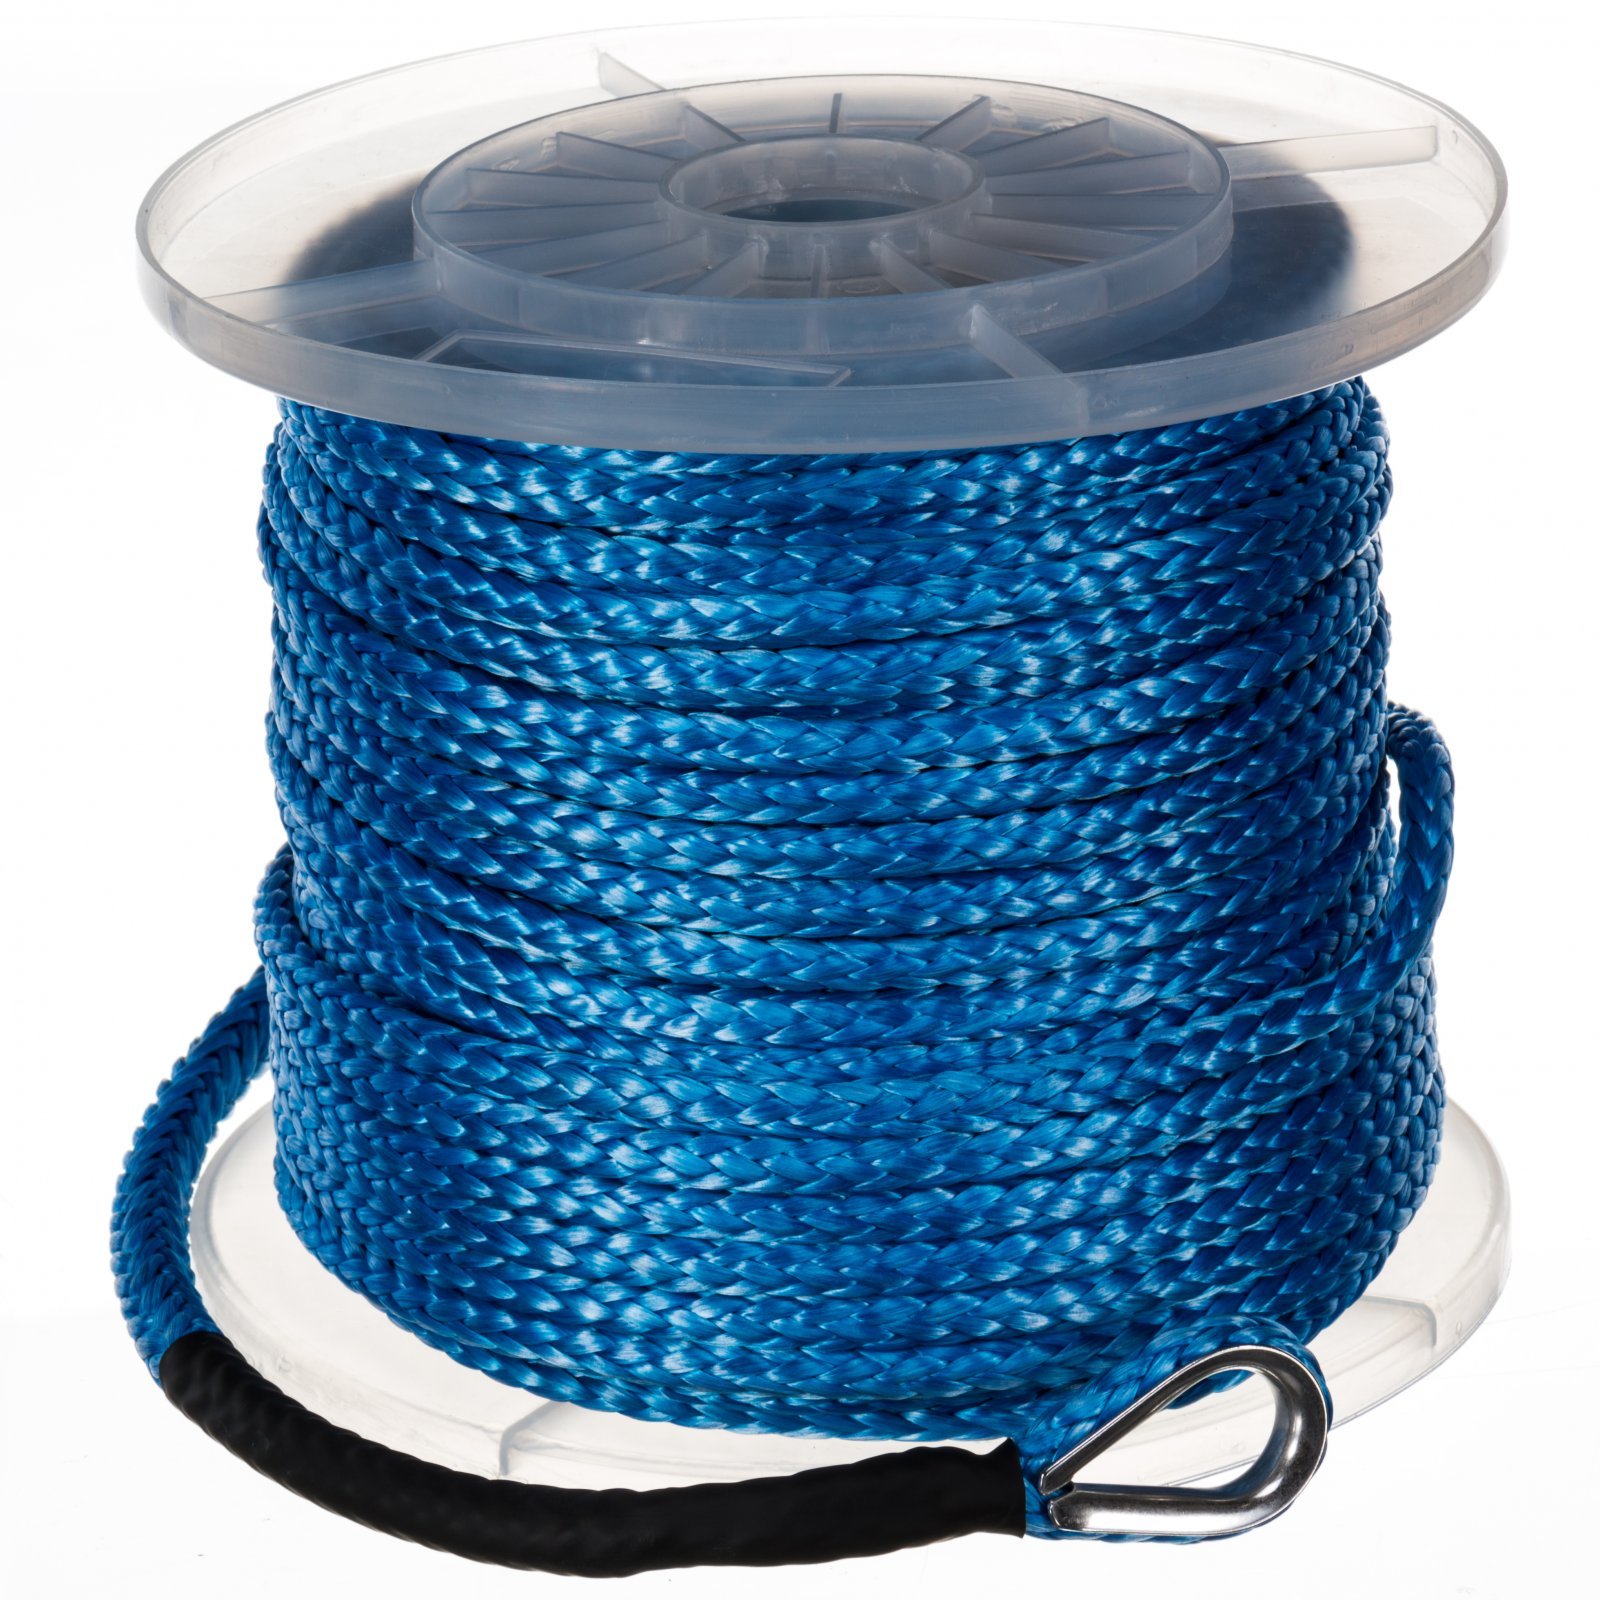 HMPE Winch Kits ropes - Lowest prices, free shipping